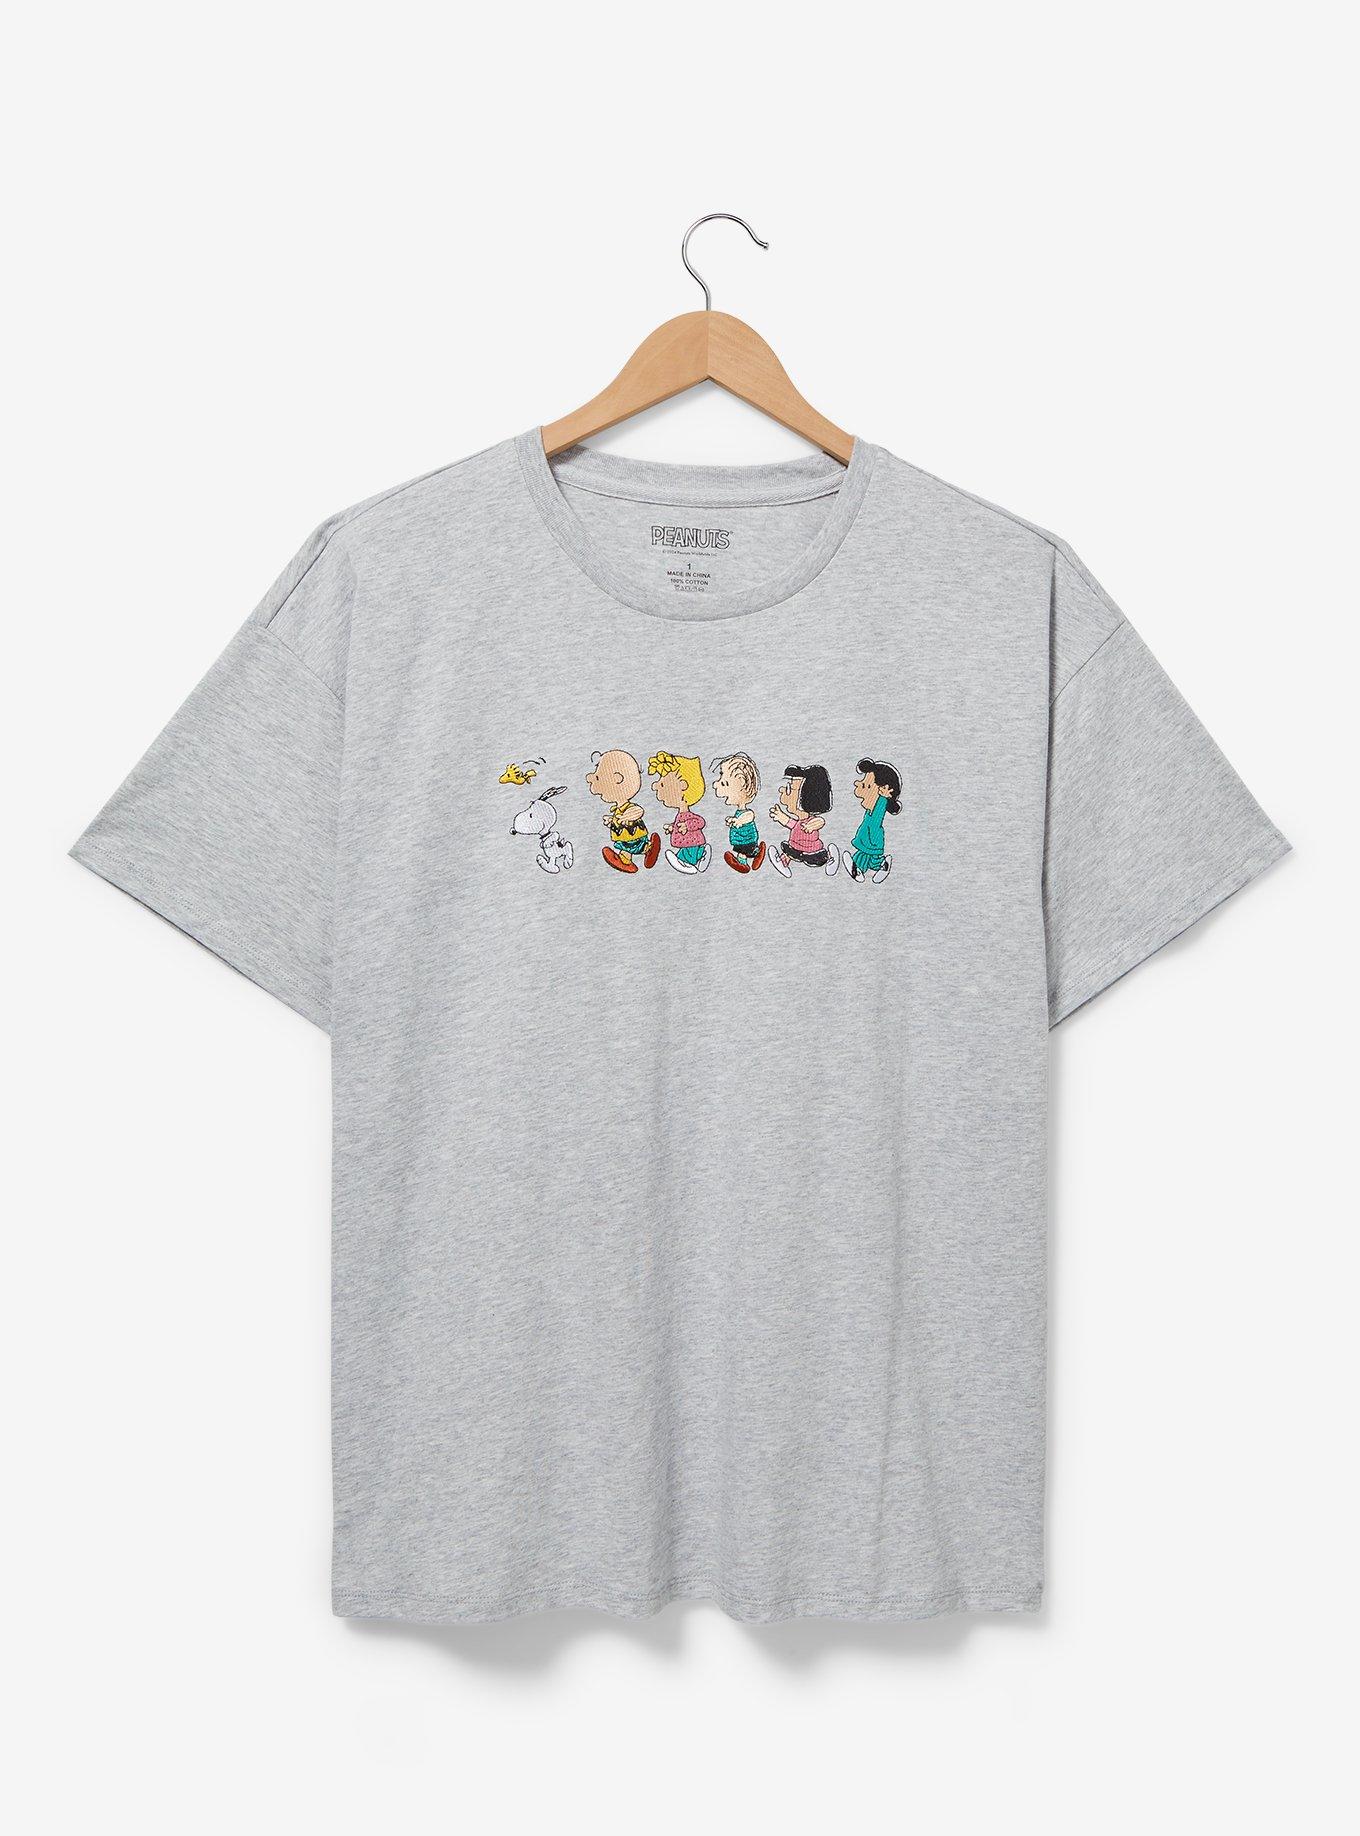 Peanuts Characters Running Women's Plus Size T-Shirt - BoxLunch Exclusive, HEATHER, hi-res